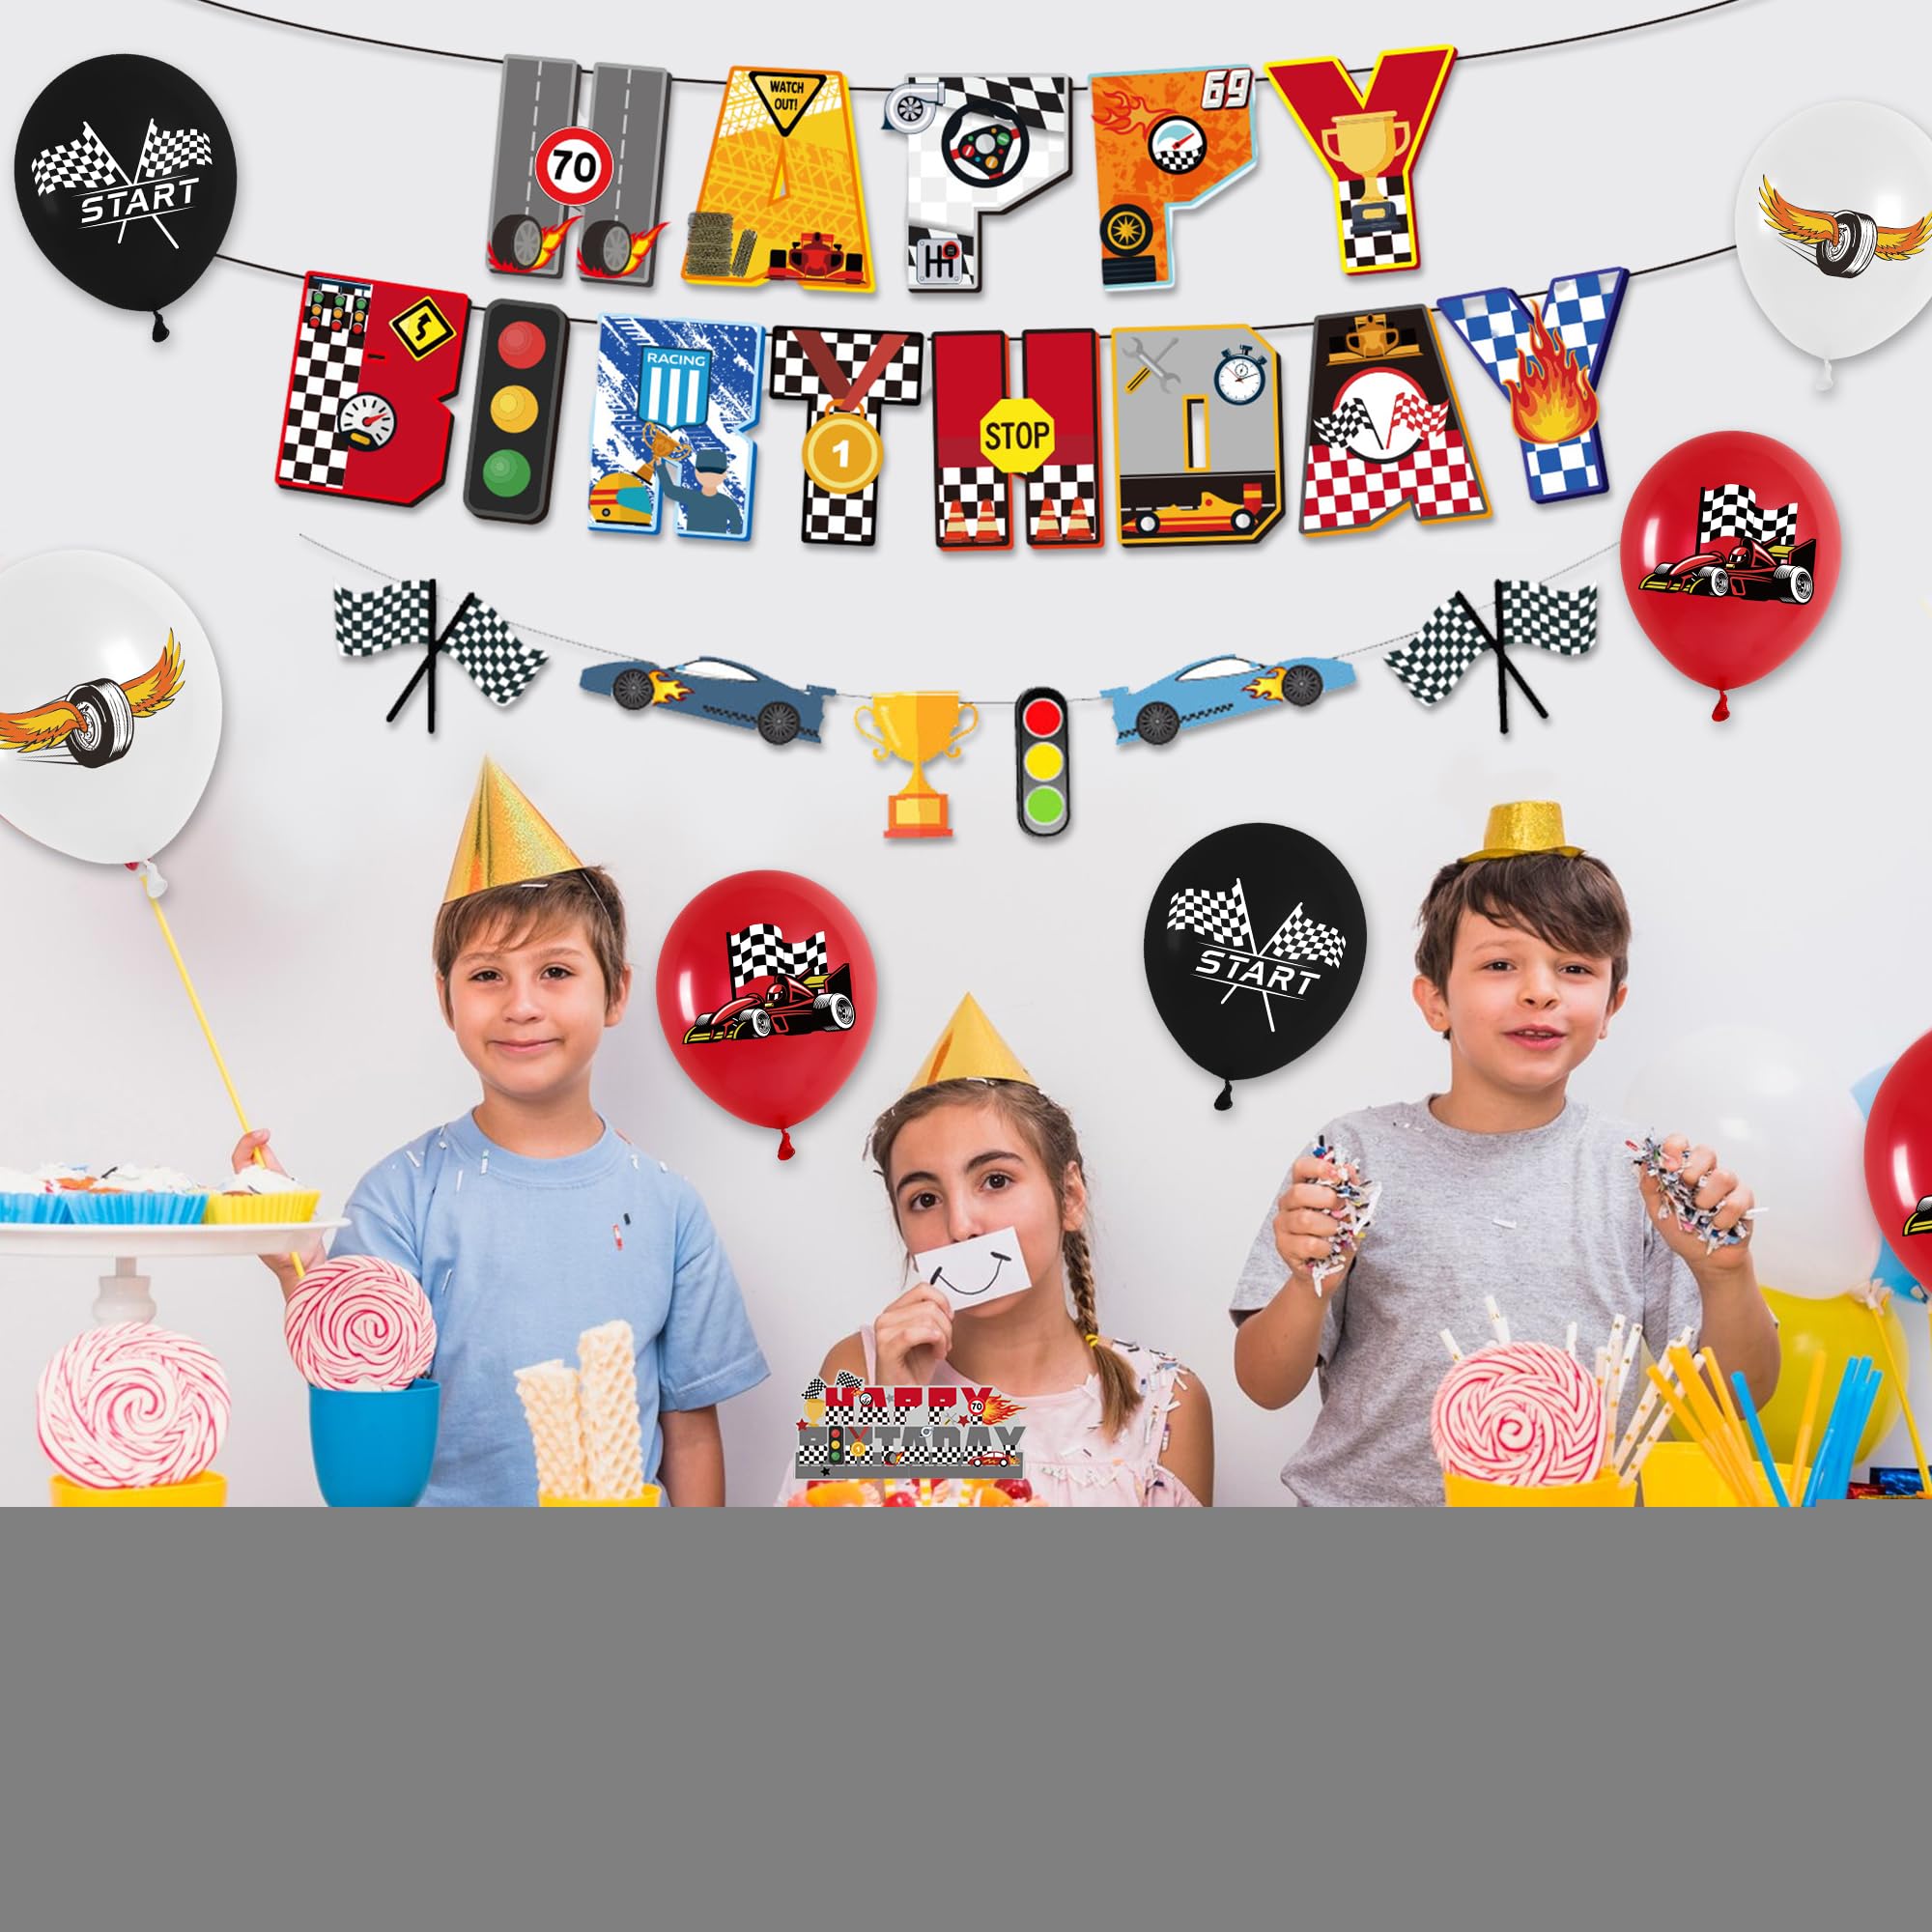 Race Car Birthday Party Decorations - Car Party Supplies Includes Birthday Banner Cake Topper Cupcake Topper Latex Balloons Sticker for Racing Theme Party